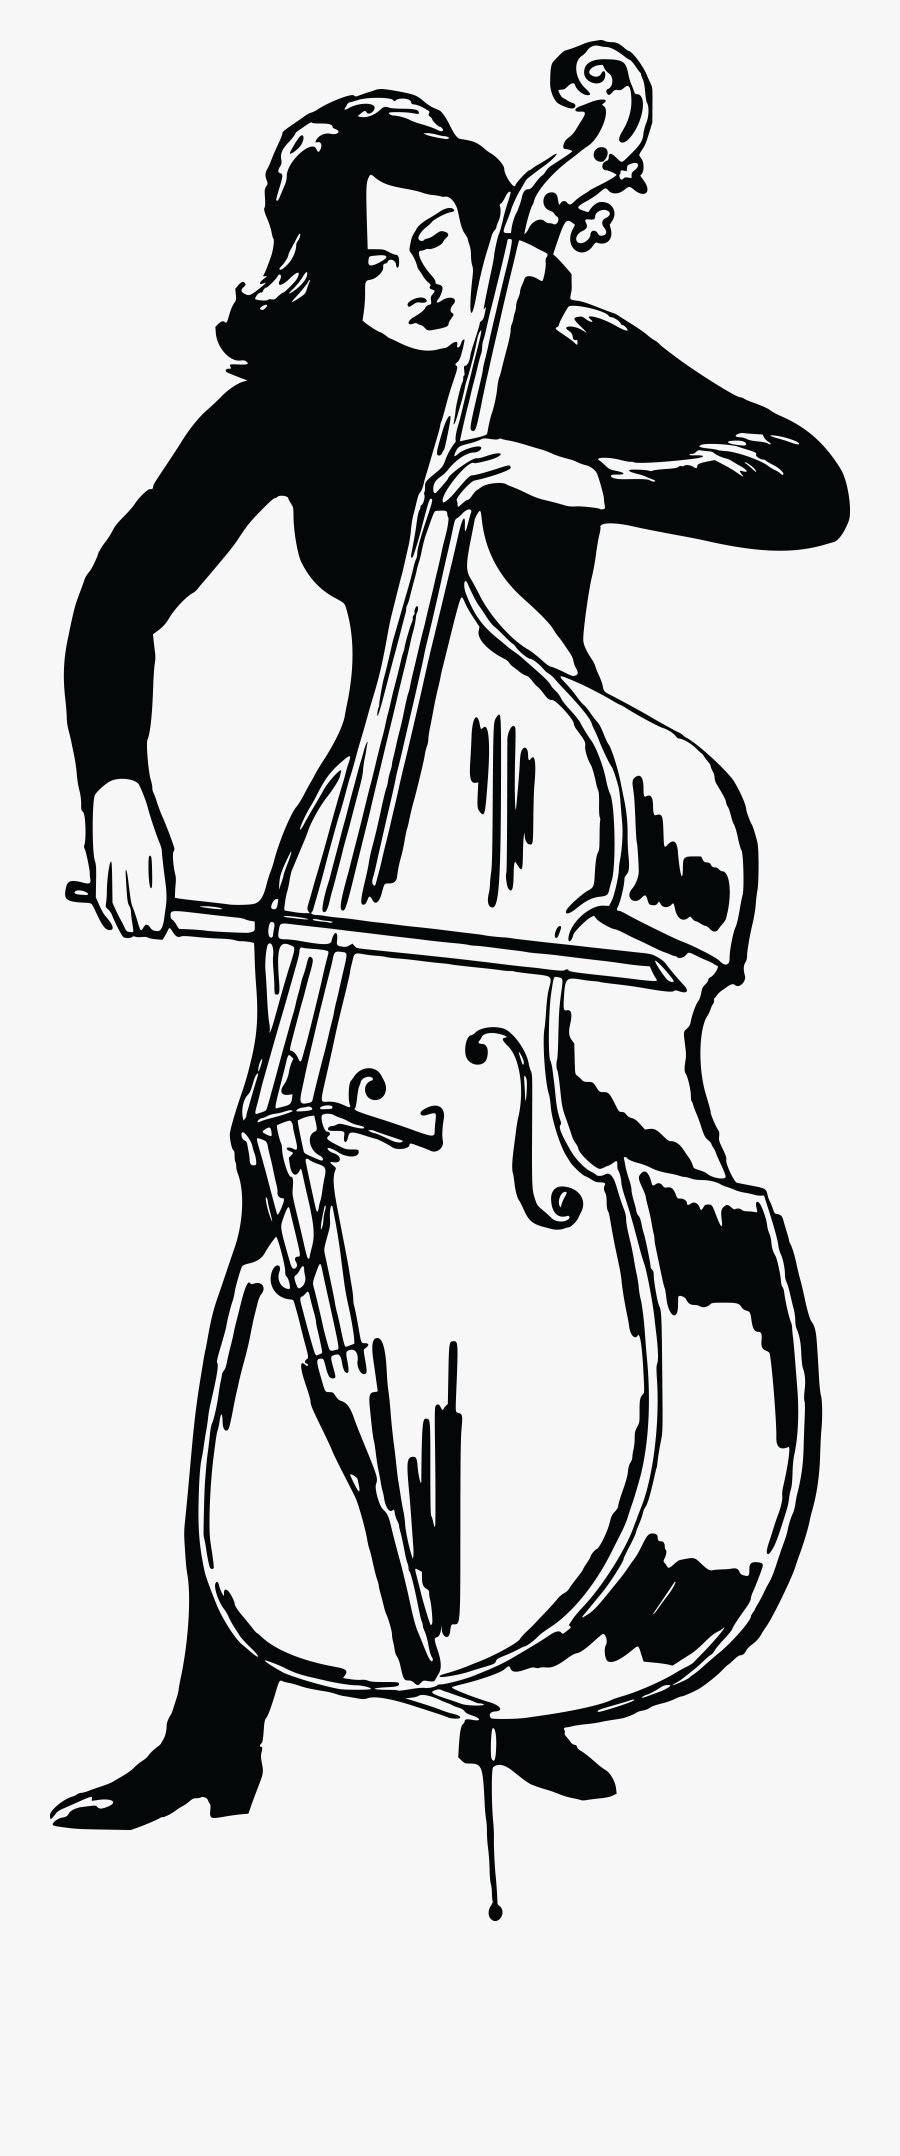 Free Clipart Of A Woman Playing A Double Bass - Double Bass Black And White, Transparent Clipart